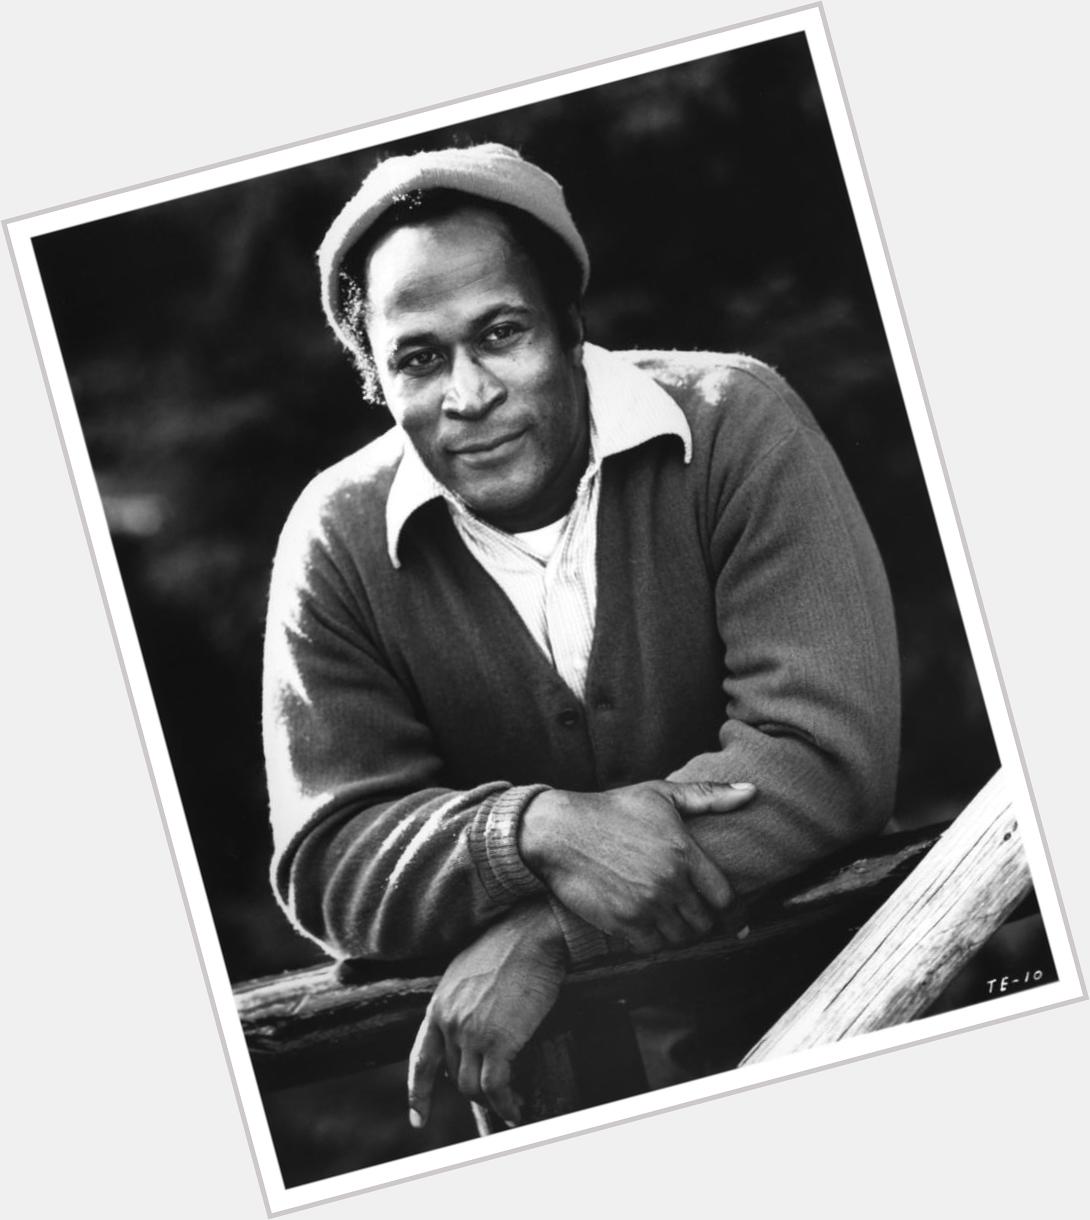 I know I\m late but Happy Belated 80th Birthday John Amos! Still kicking it strong in the acting game! 